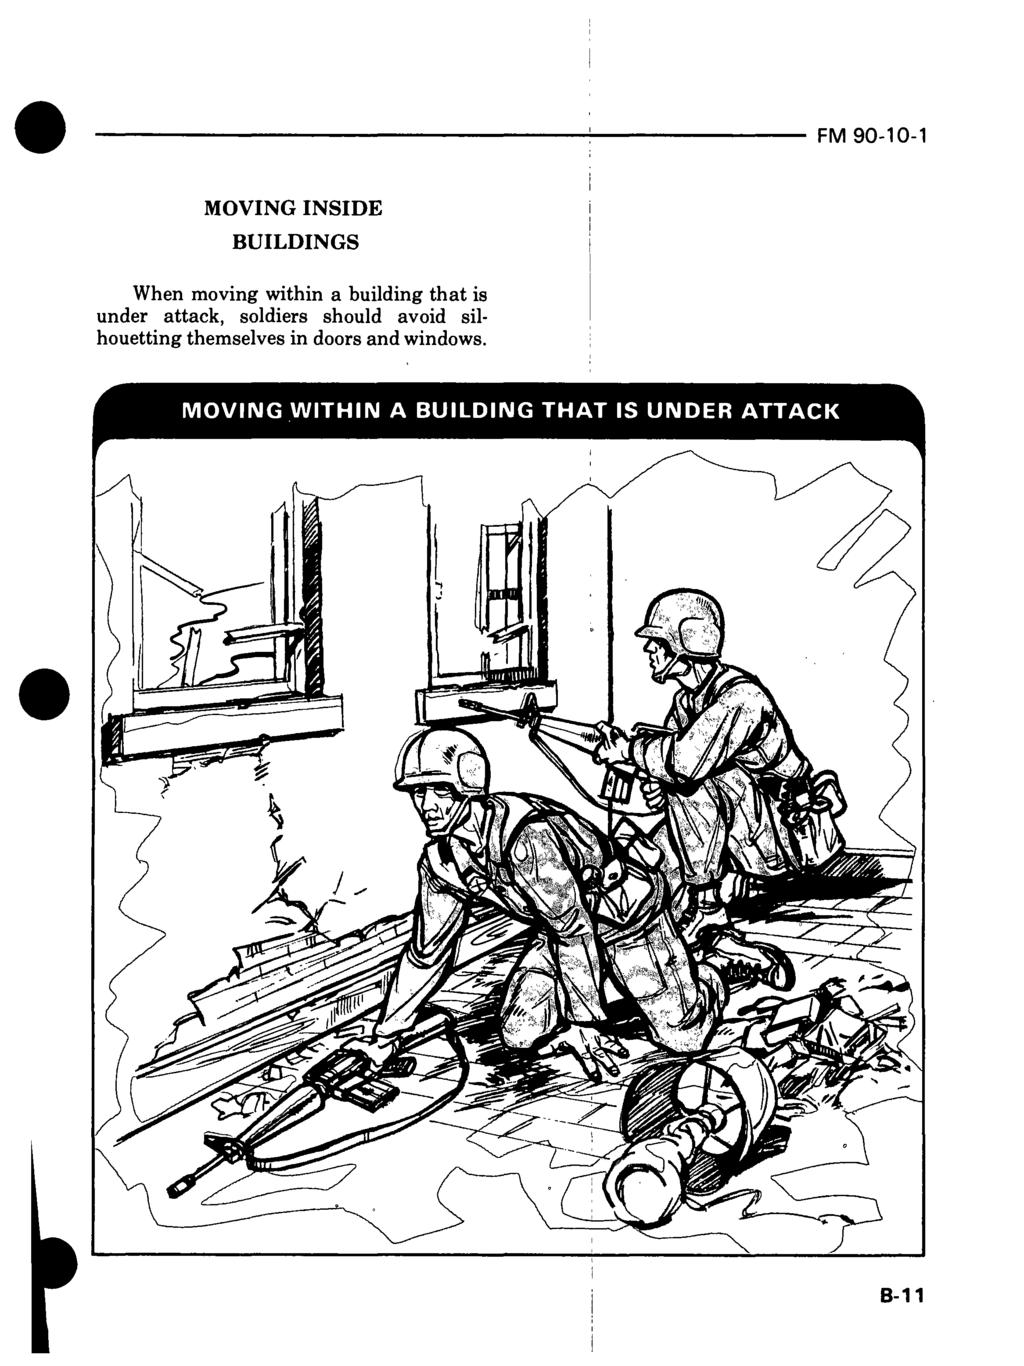 MOVING INSIDE BUILDINGS When moving within a building that is under attack, soldiers should avoid